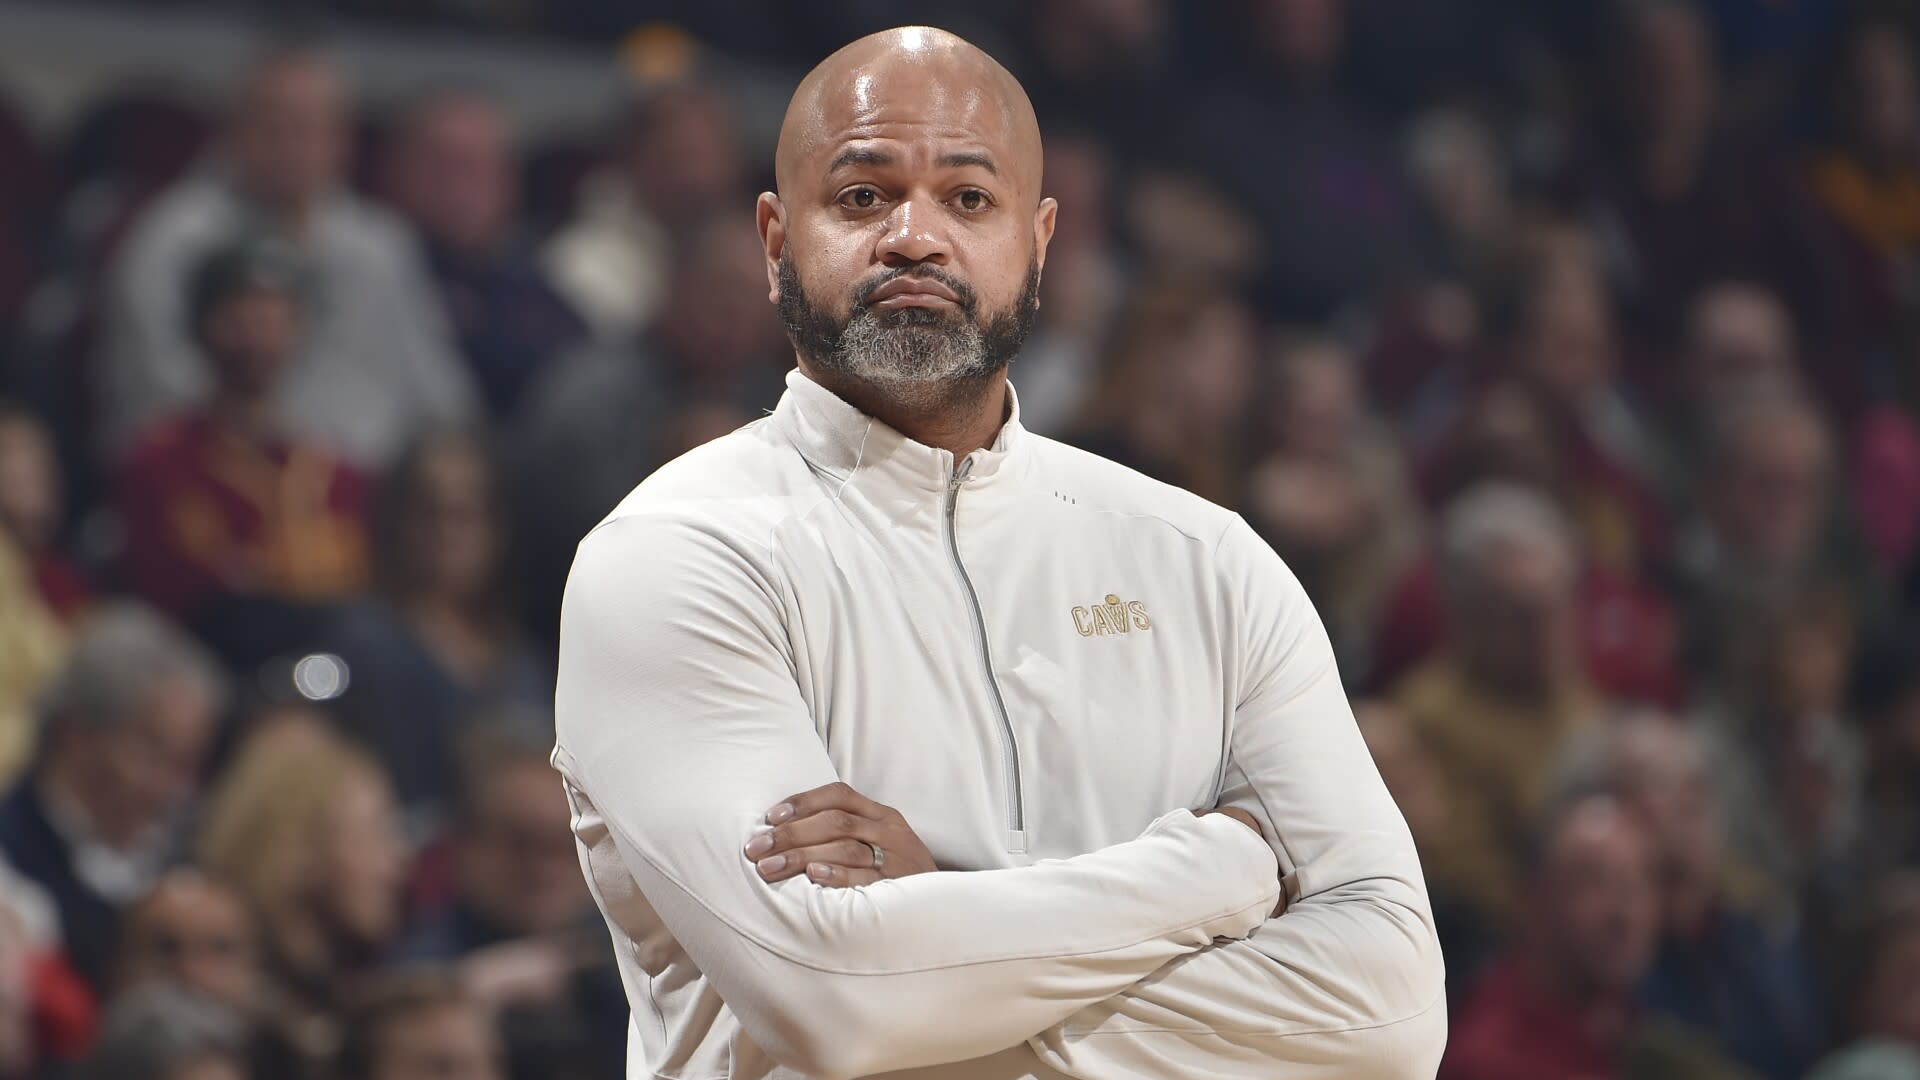 Cavaliers coach Bickerstaff recounts physical threats he got from frustrated gamblers